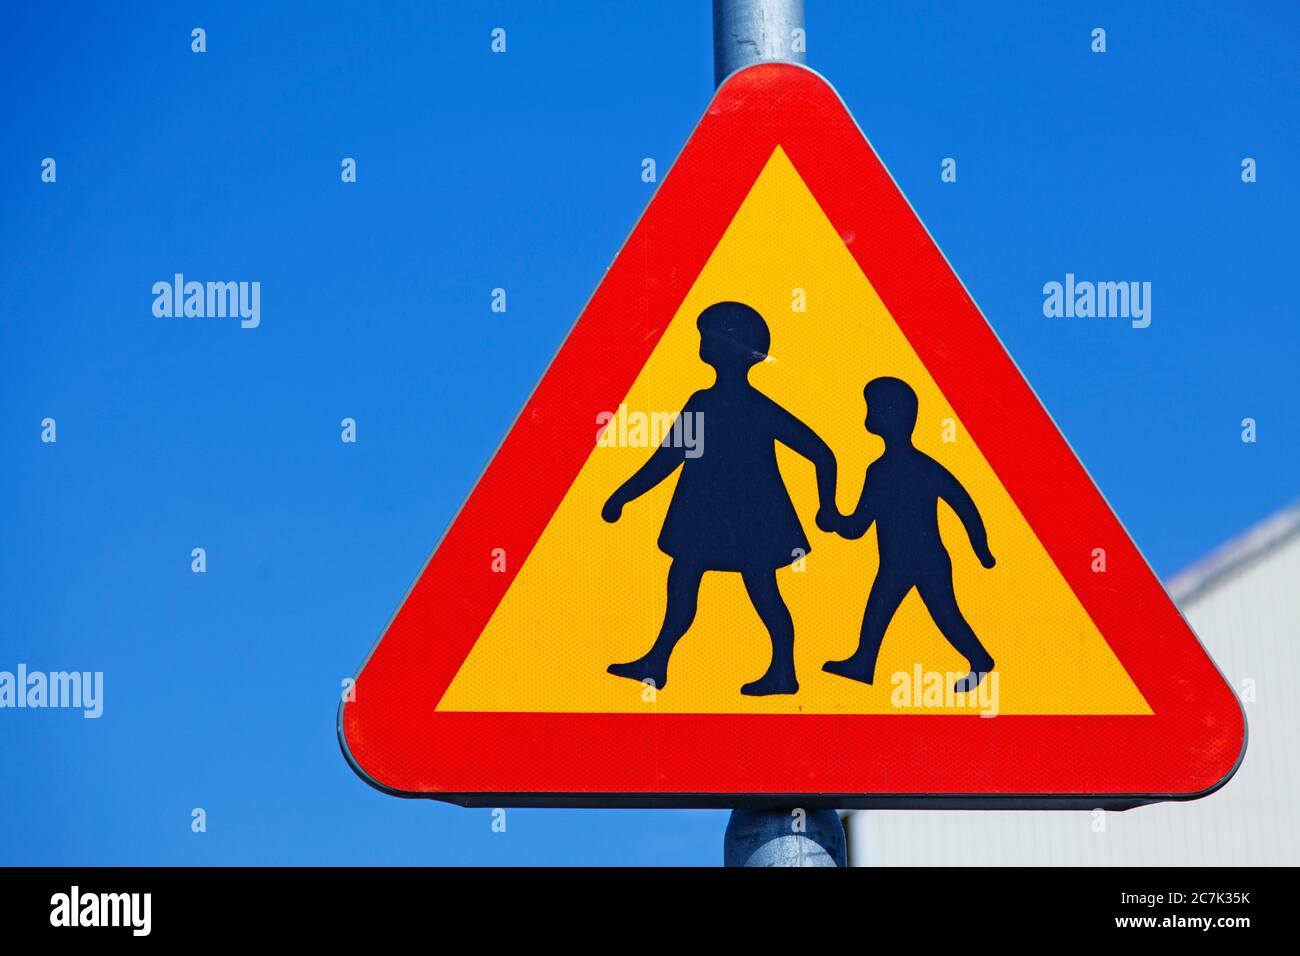 traffic sign warning for children crossing the road Stock Photo